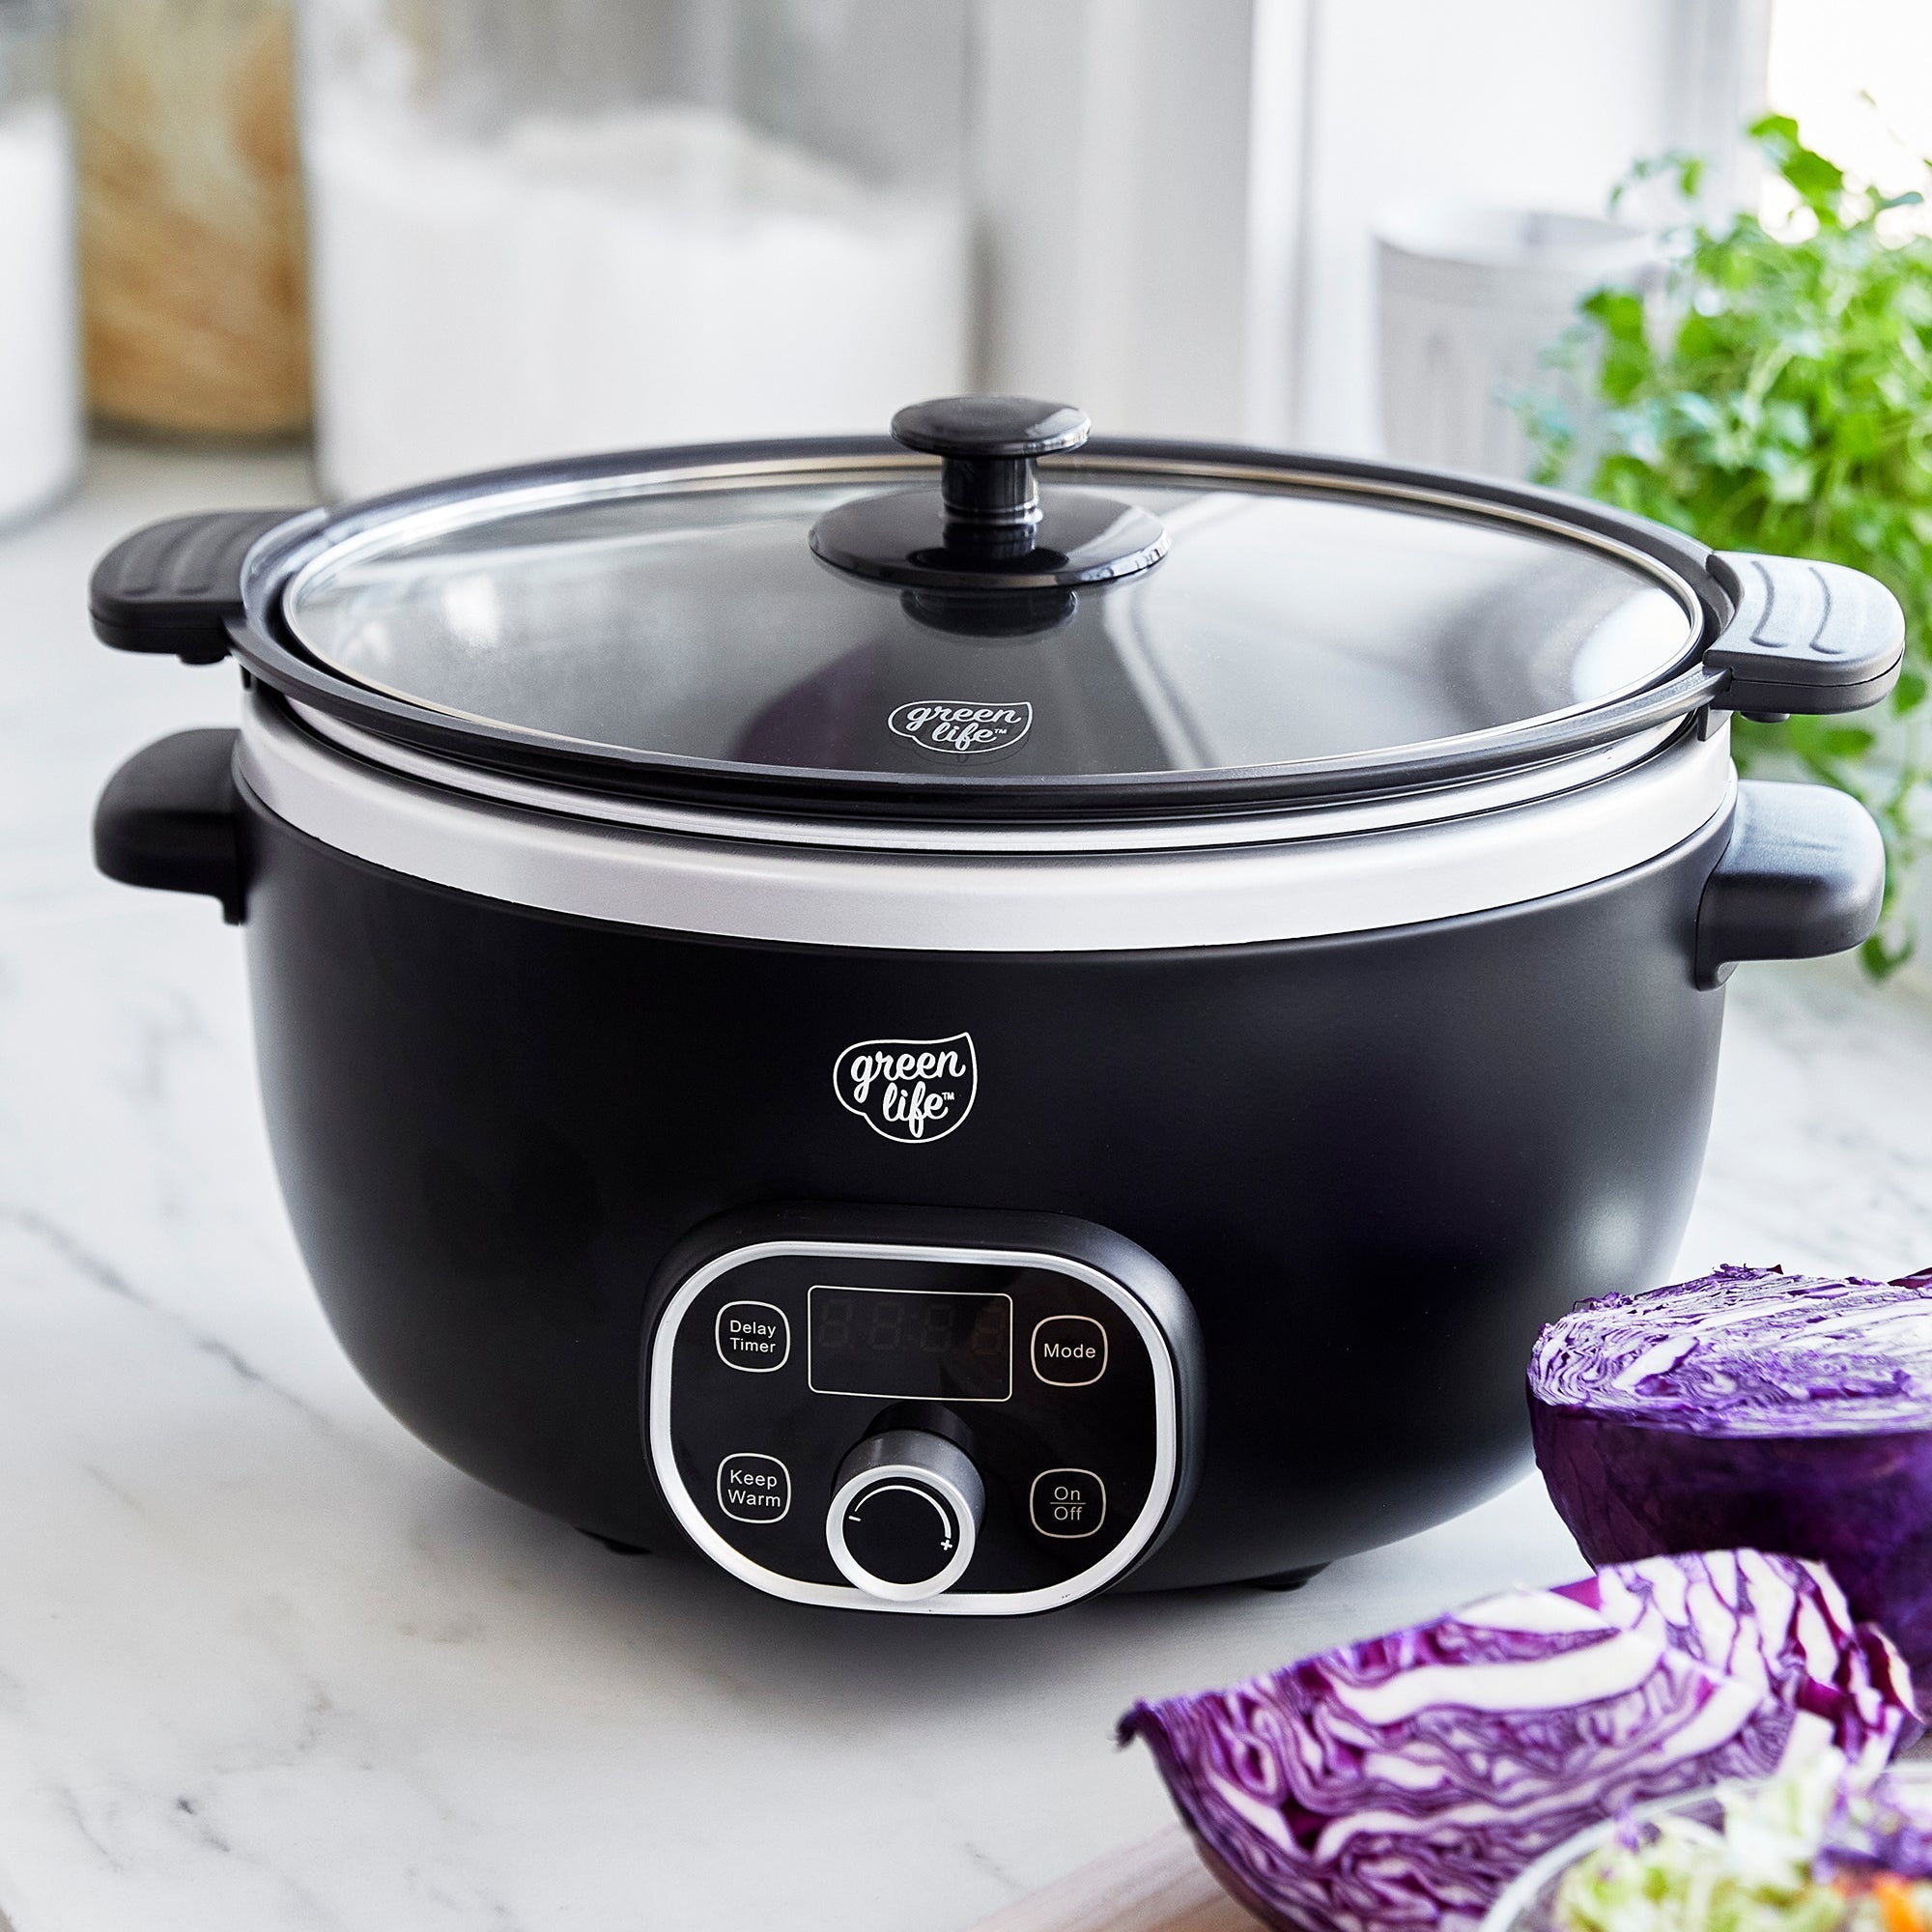  GreenLife Cook Duo Healthy Ceramic 6QT Slow Cooker